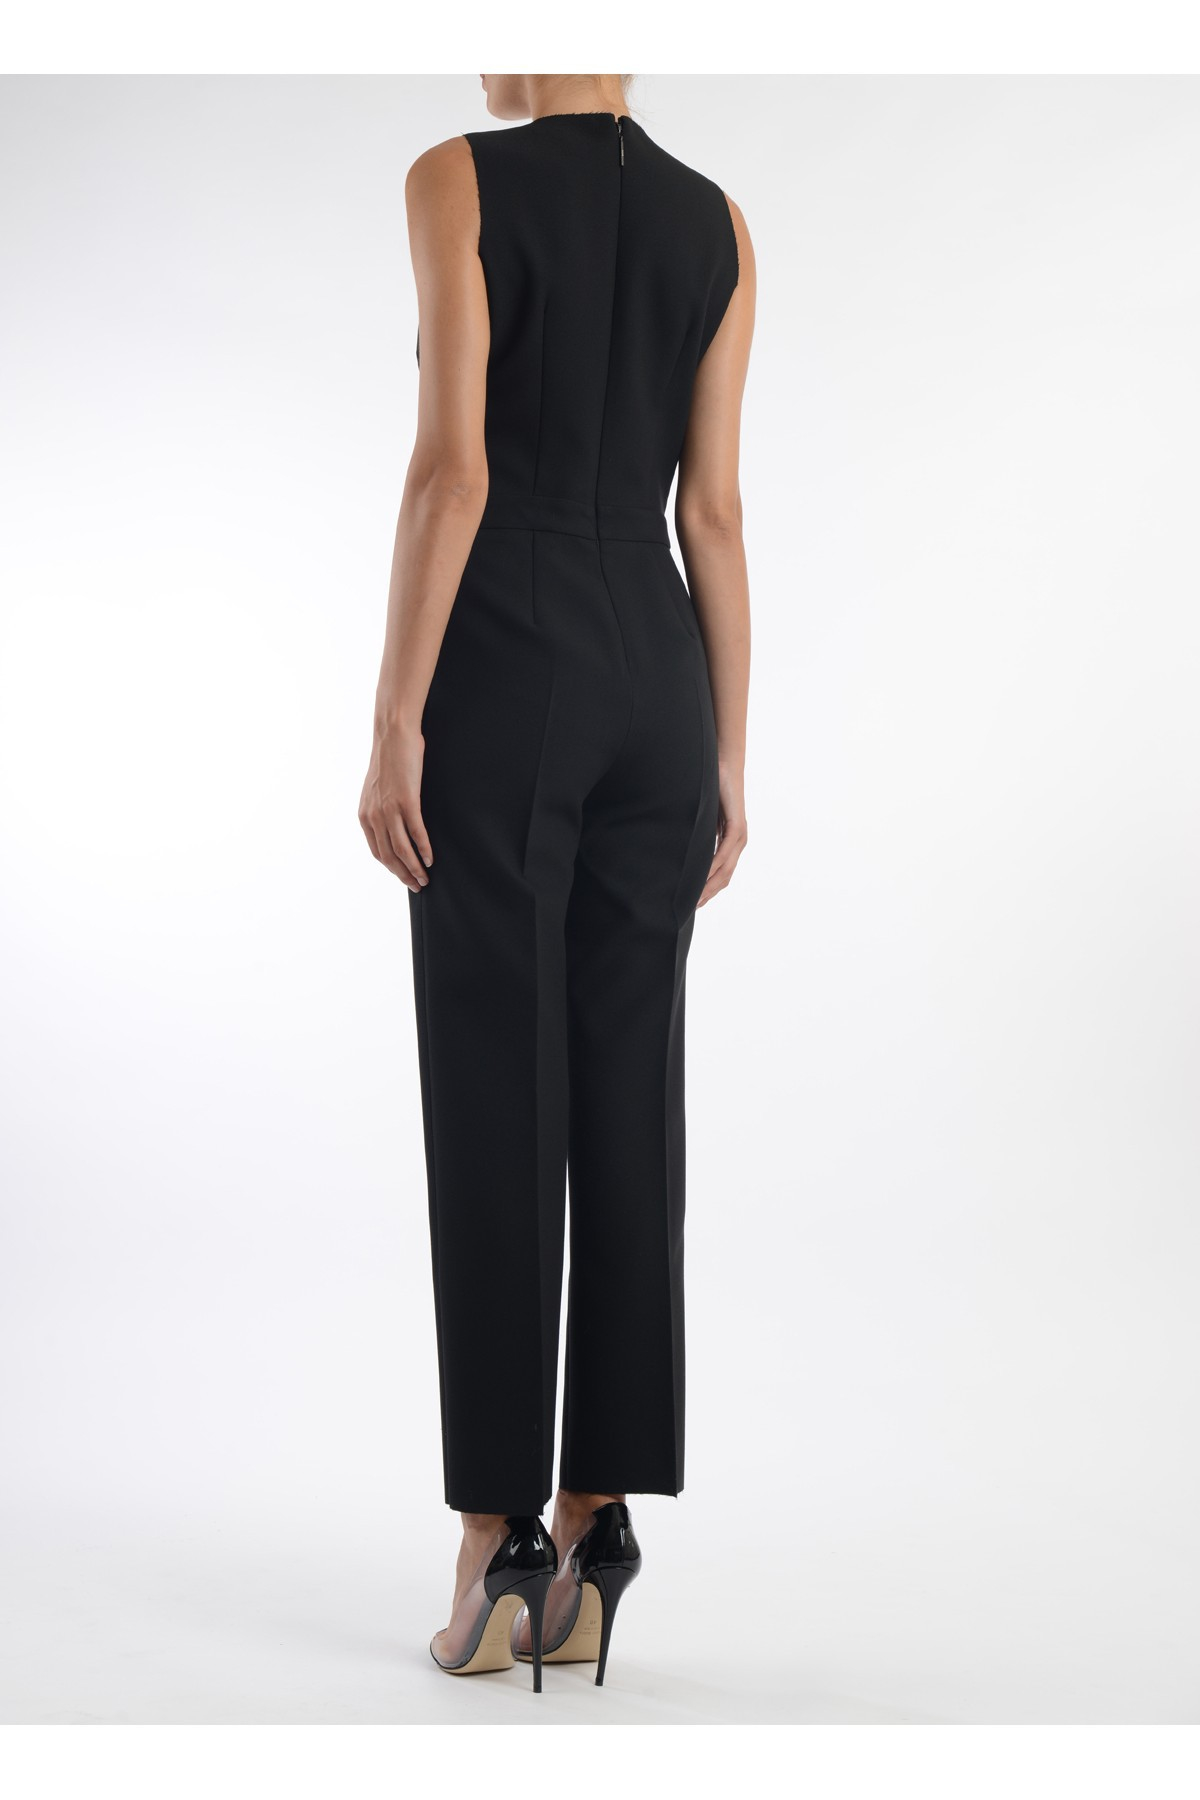 Msgm Sleeveless Jumpsuit With Straight Leg in Black | Lyst